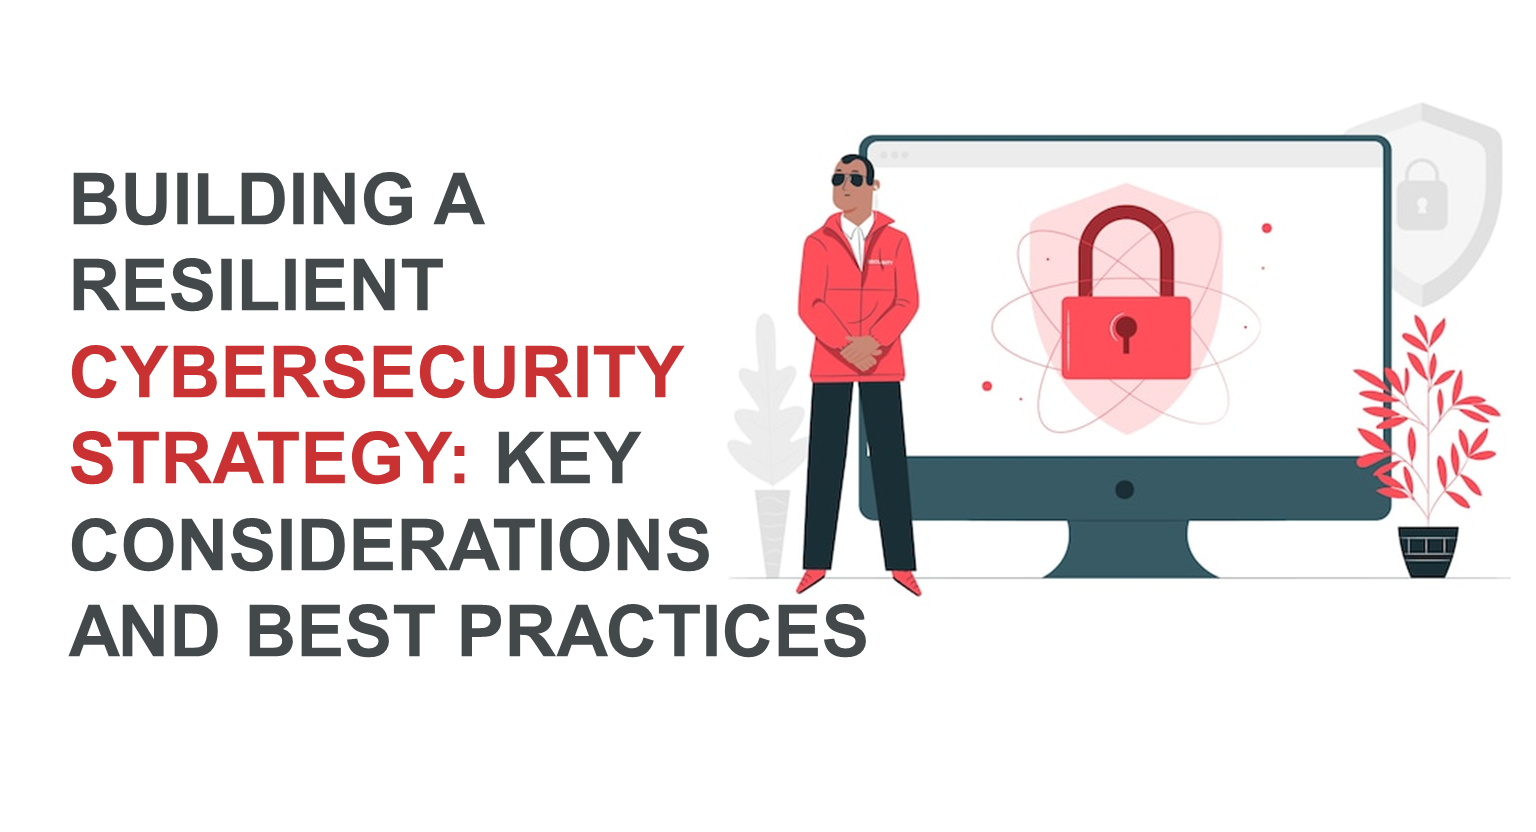 Building a Resilient Cybersecurity Strategy: Key Considerations and Best Practices